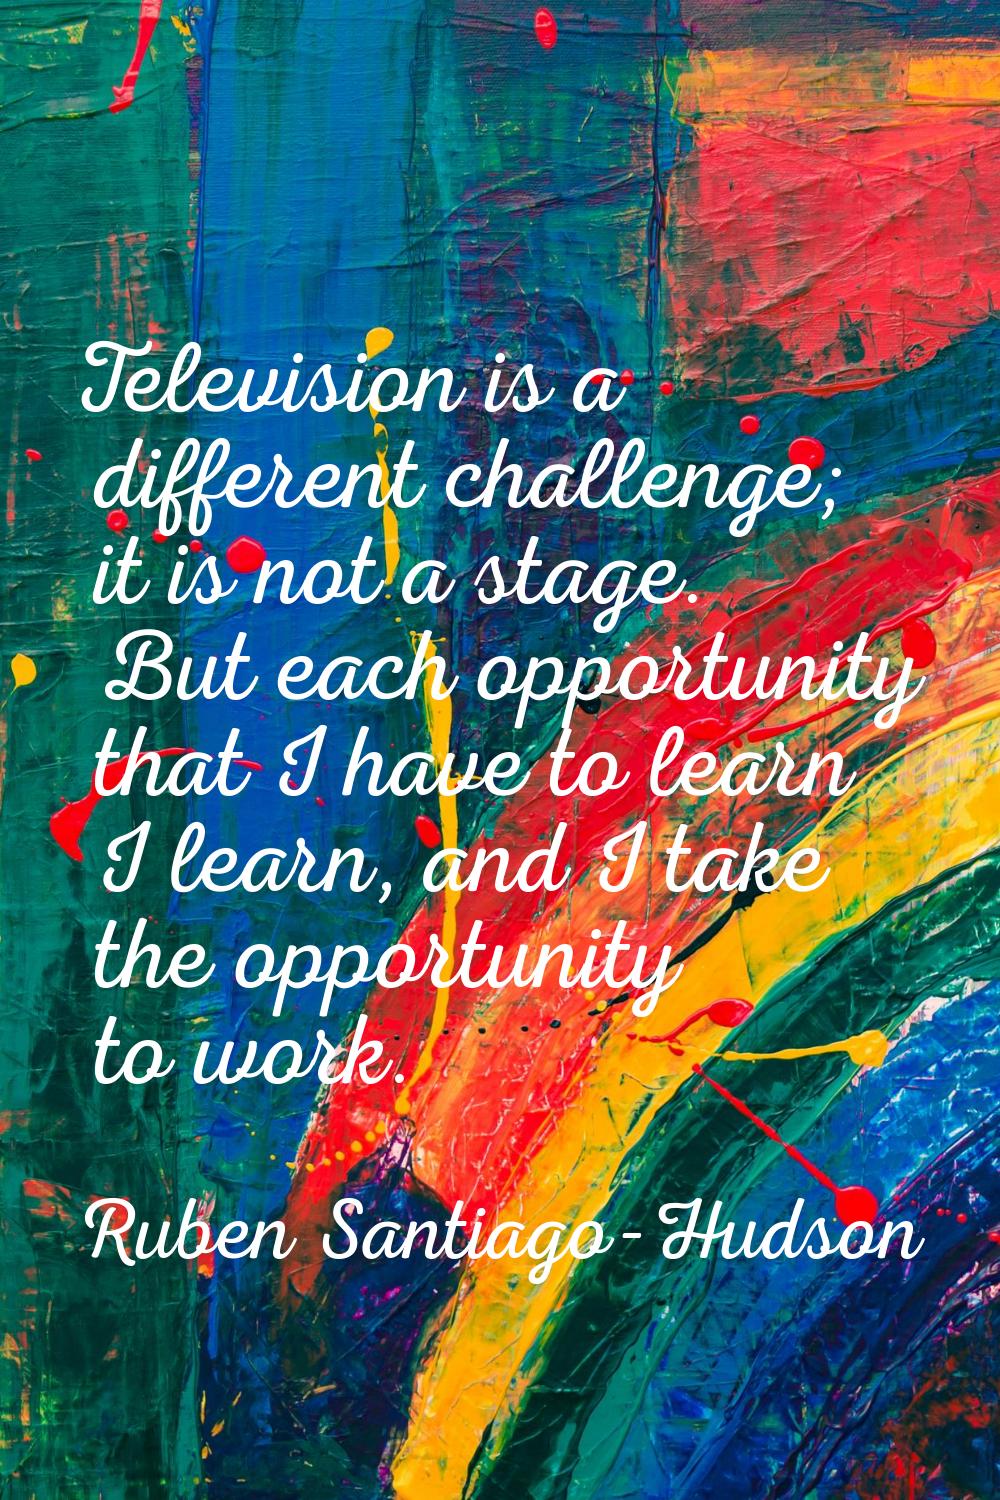 Television is a different challenge; it is not a stage. But each opportunity that I have to learn I